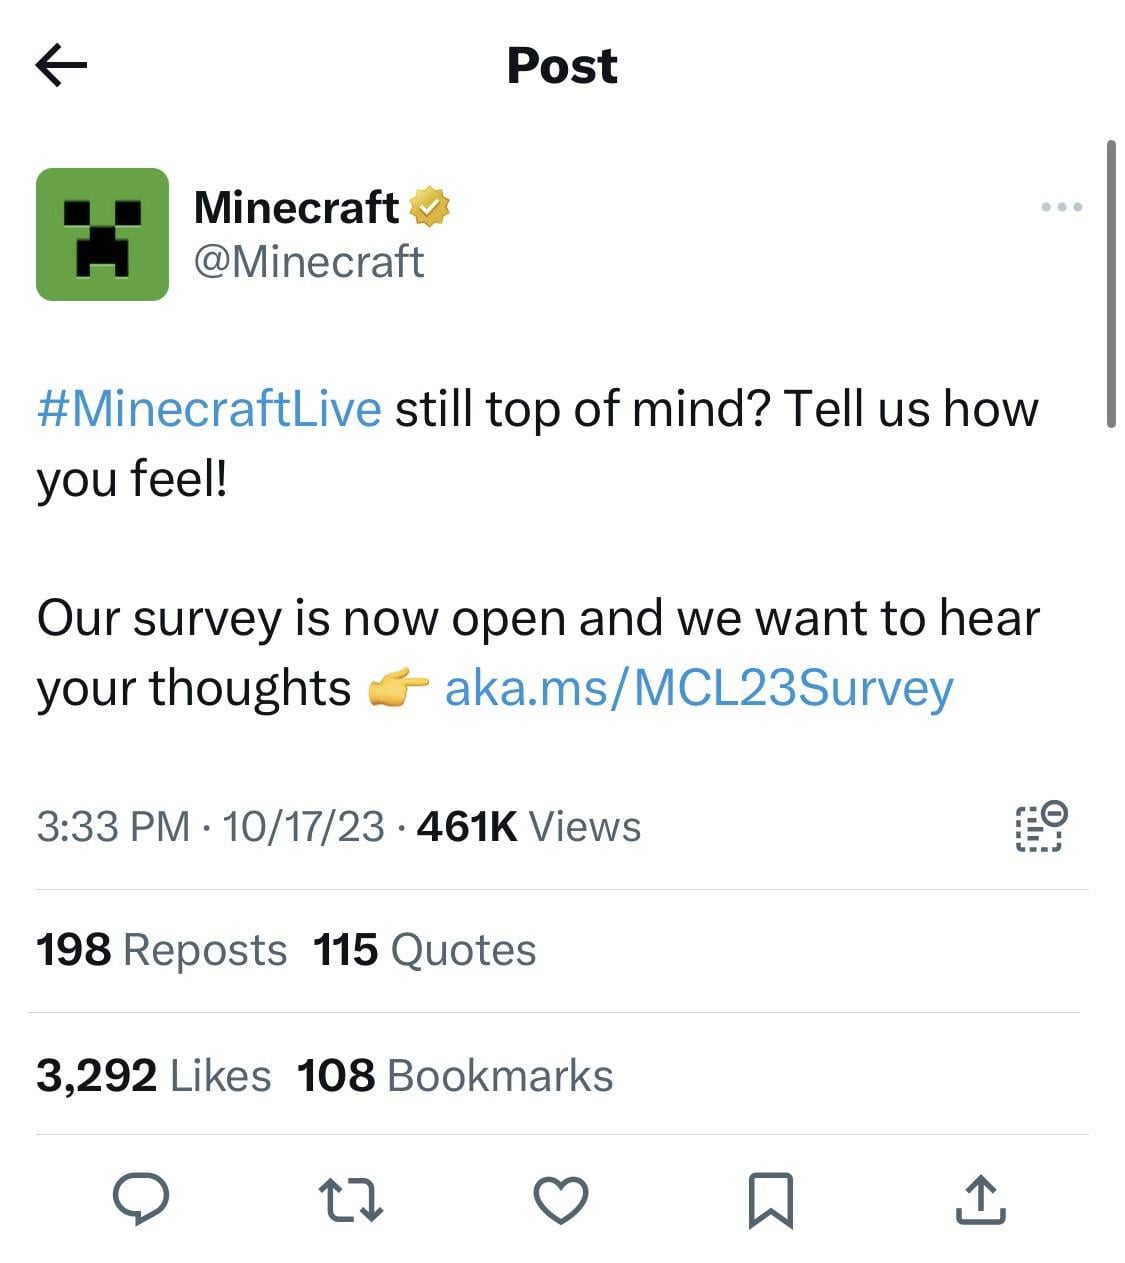 Minecraft Memes - They sure do have some balls posting this.